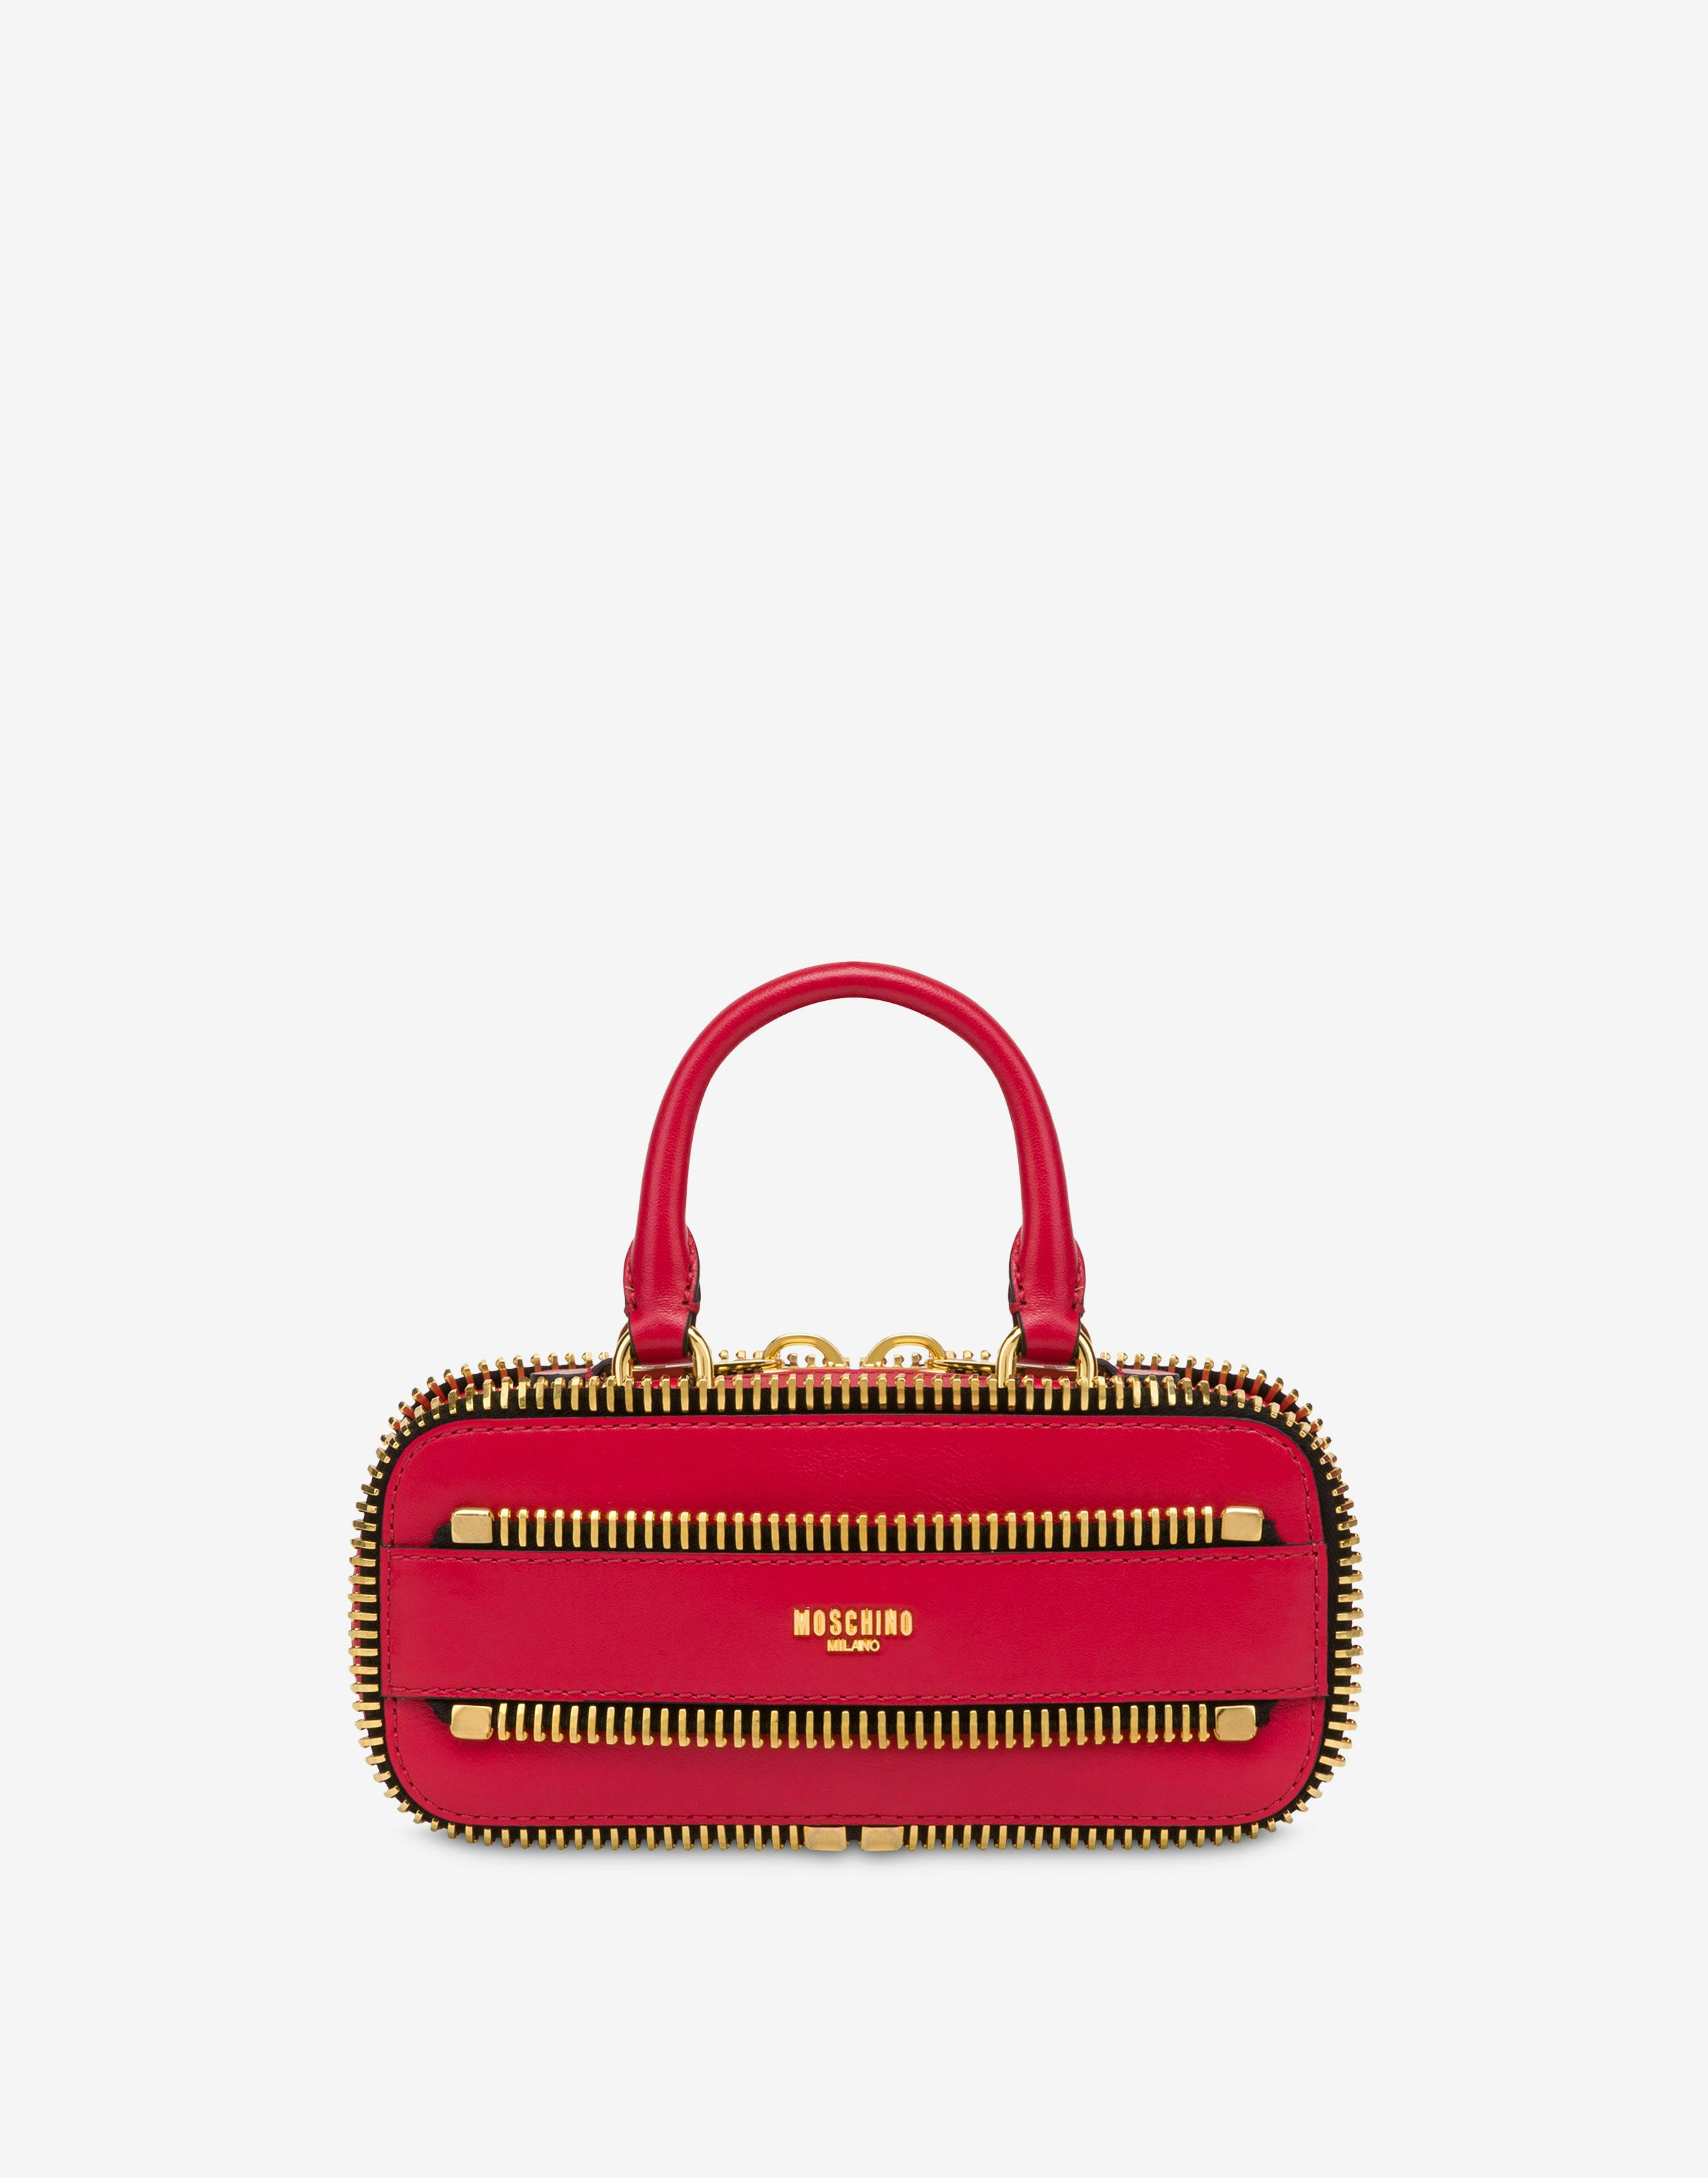 Moschino Borse a Mano for Donna - Official Store